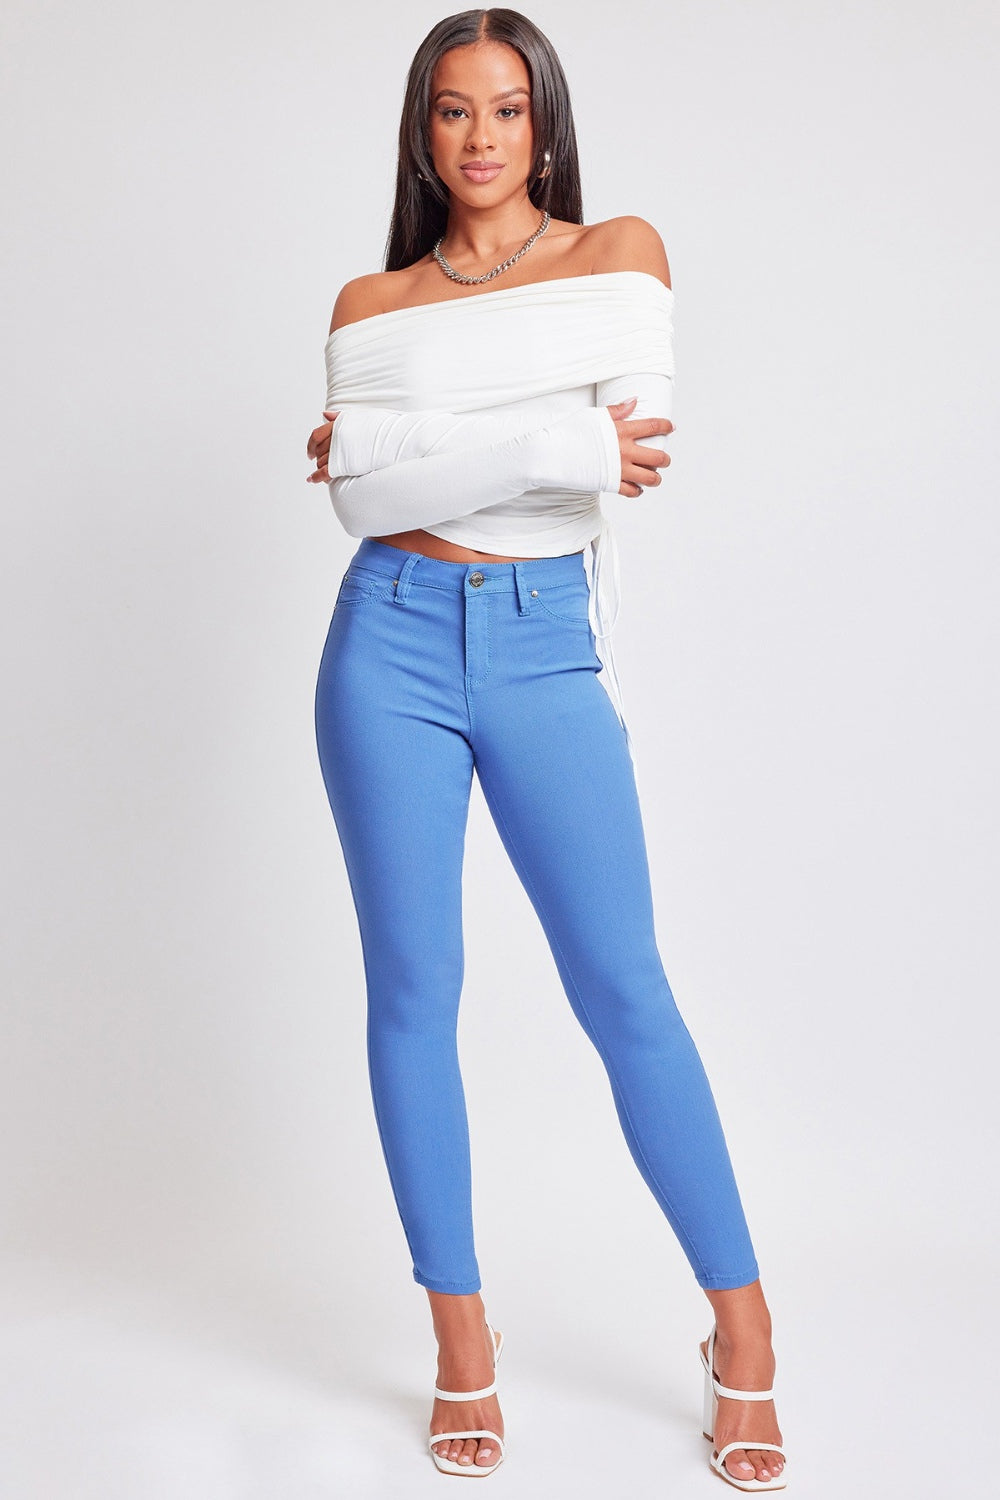 Shop YMI Hyperstretch Mid-Rise Skinny Pants for a flattering fit, versatile style, and ultimate comfort. Find your perfect pair today!